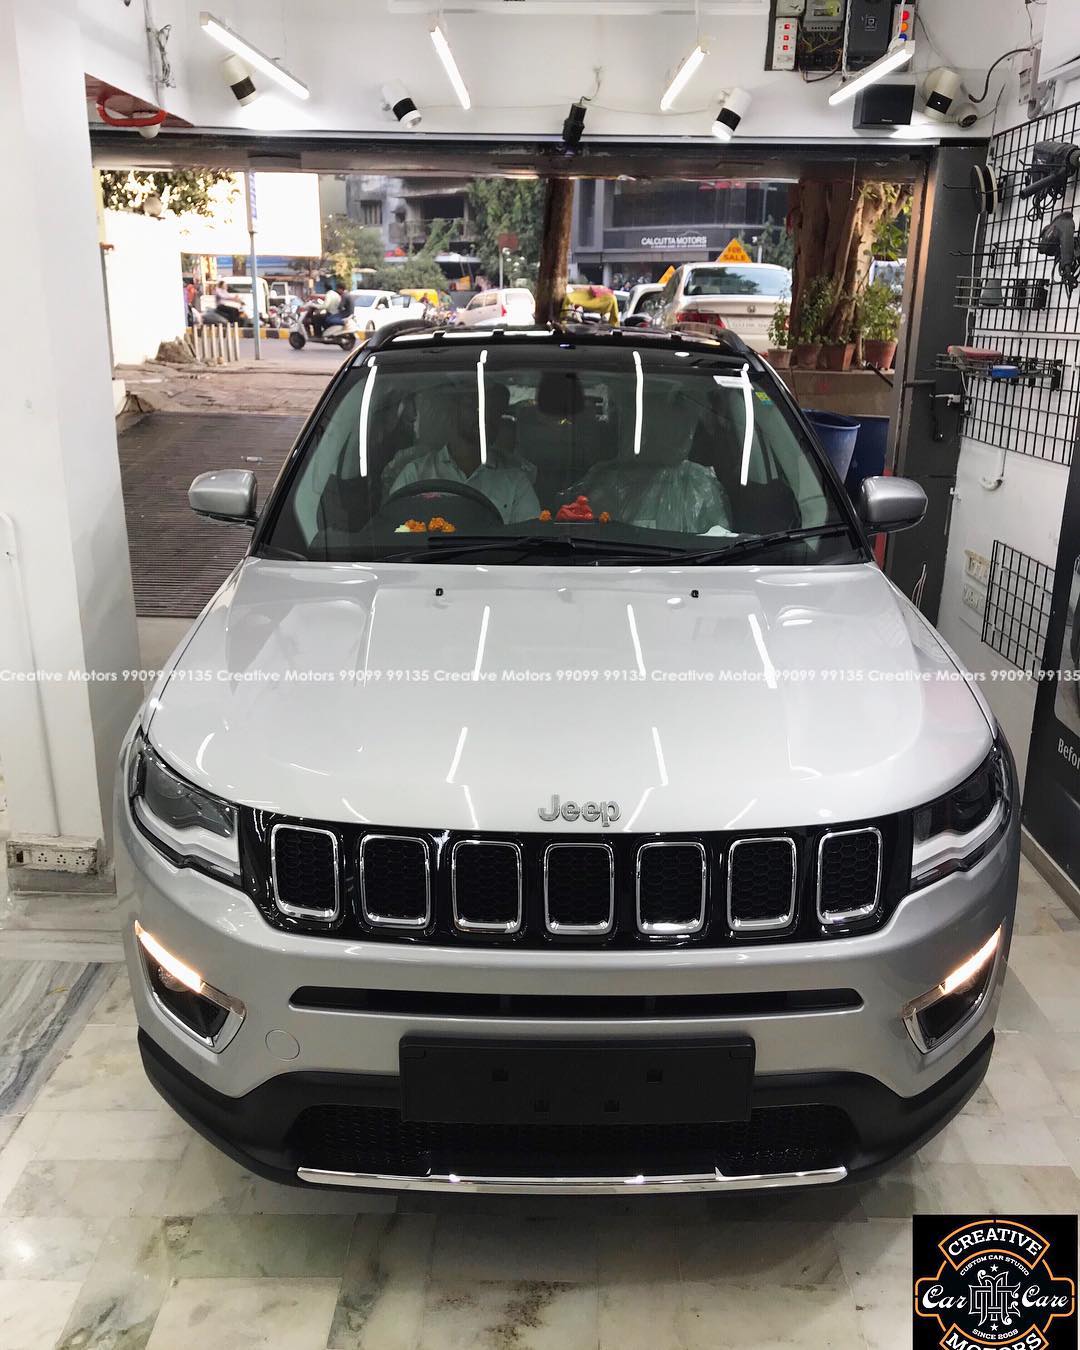 Creative Motors,  JEEP, COMPASS, Silver, Best, Ceramic, Creative, Motors’’, Ceramic, Benefits:, creativemotors, bikes, bikers, Cars, carspa, microdetailing, ceramiccoatings, coatings, glasscoatings, waterrepellant, scratchproof, minicooper, supercars, Rajkot, ahmedabad, Jeep, compass, qualityovereverything